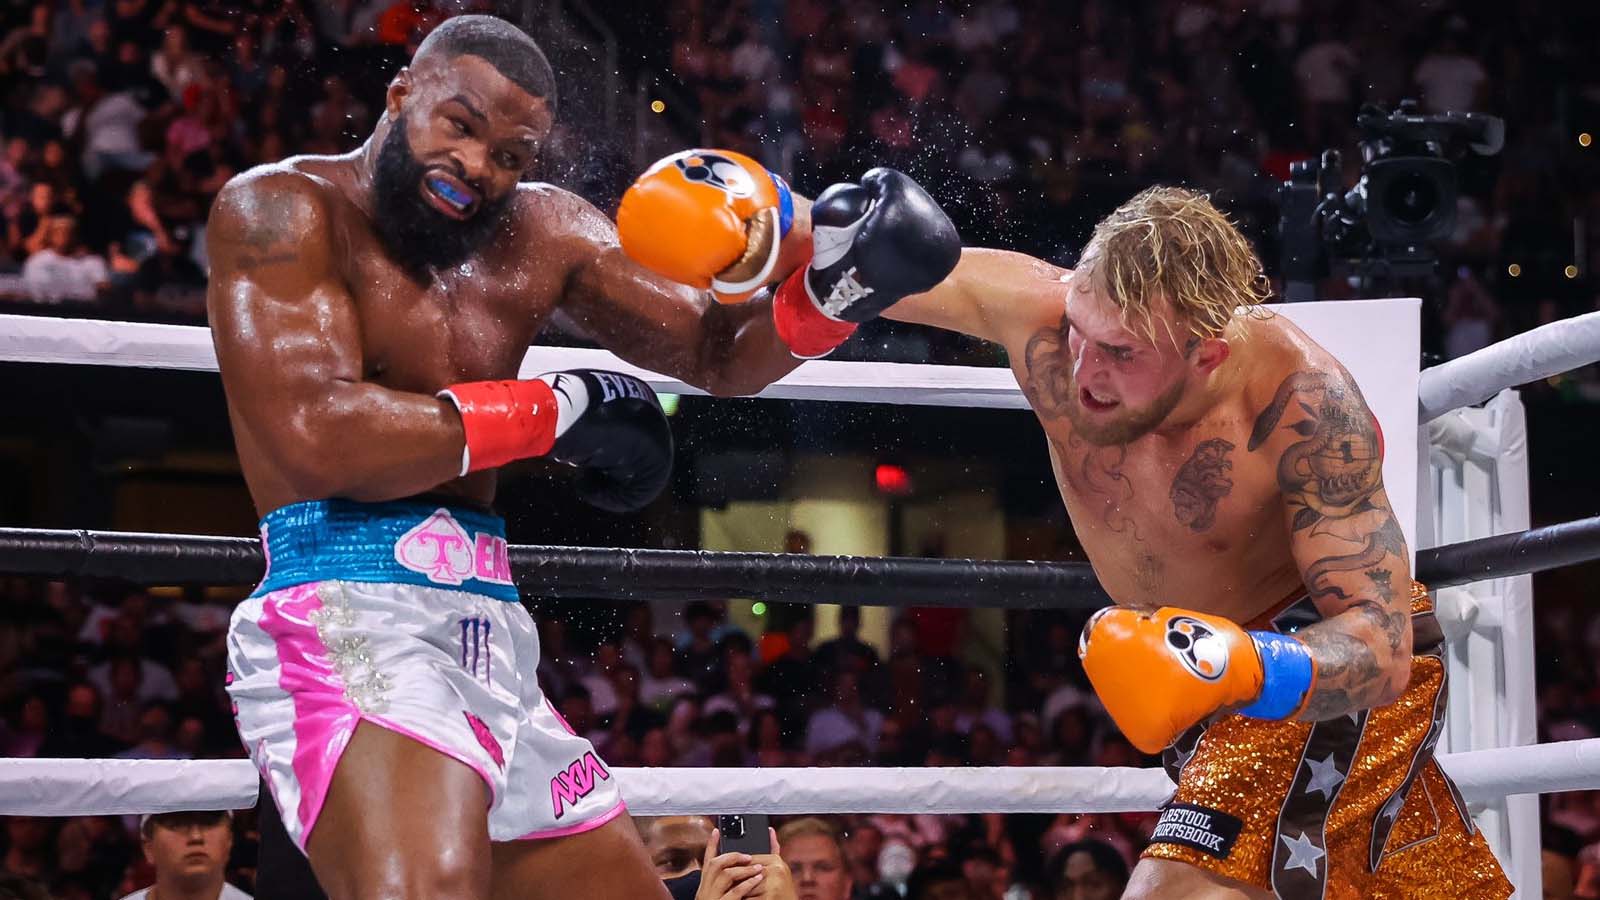 Jake Paul remains undefeated after beating Tyron Woodley Replay and recap